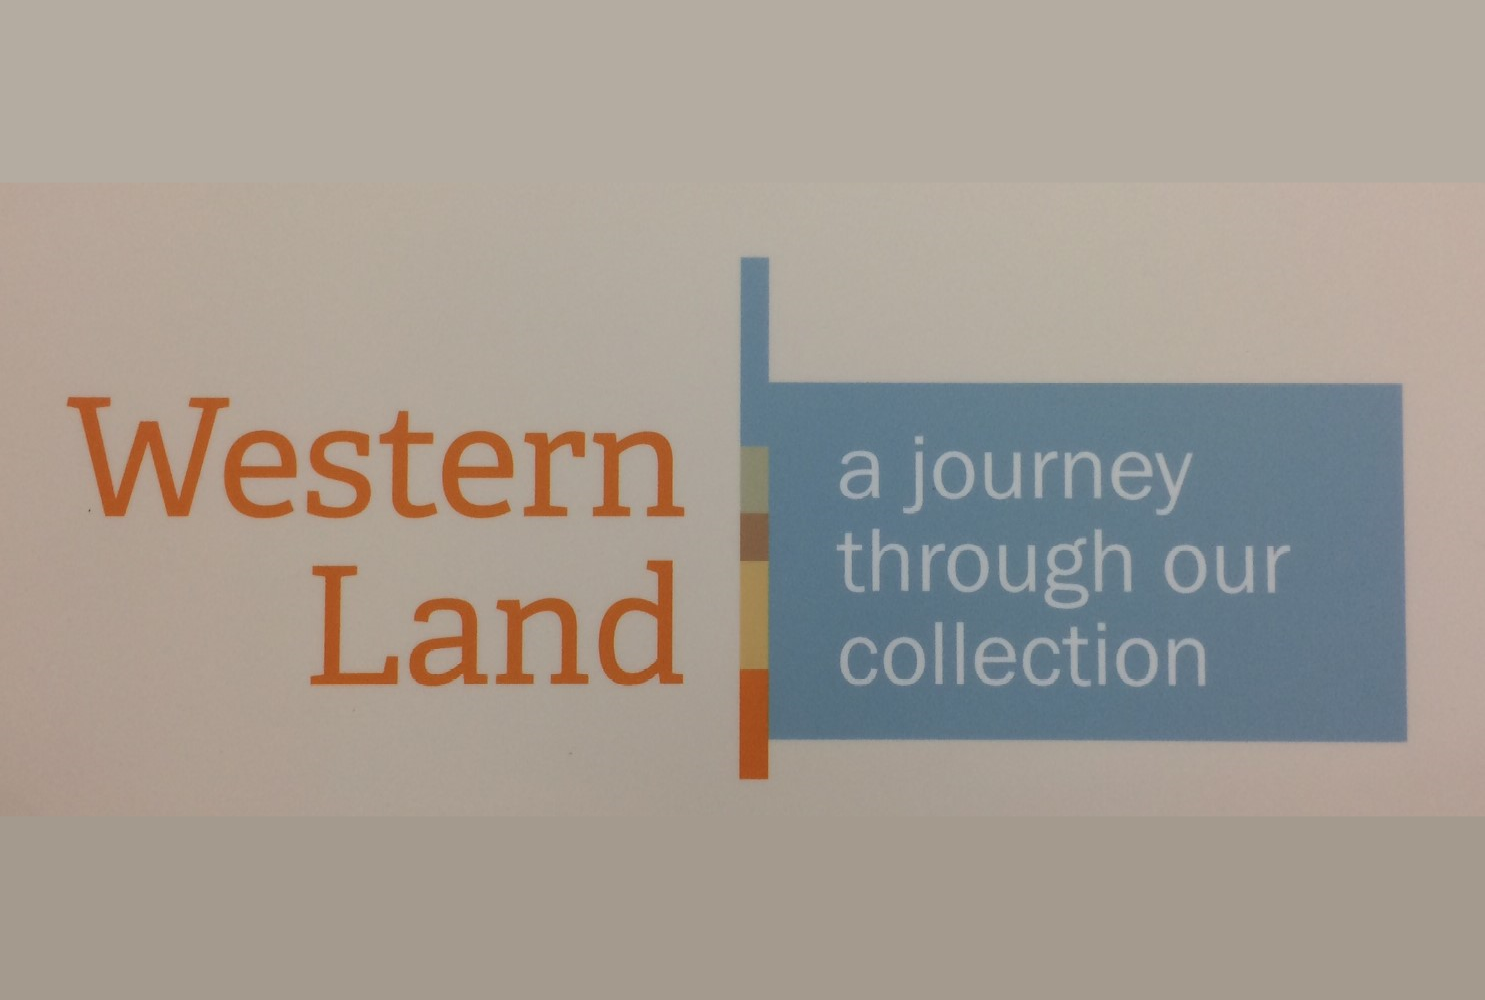 Western Land: A Journey Through our Collection